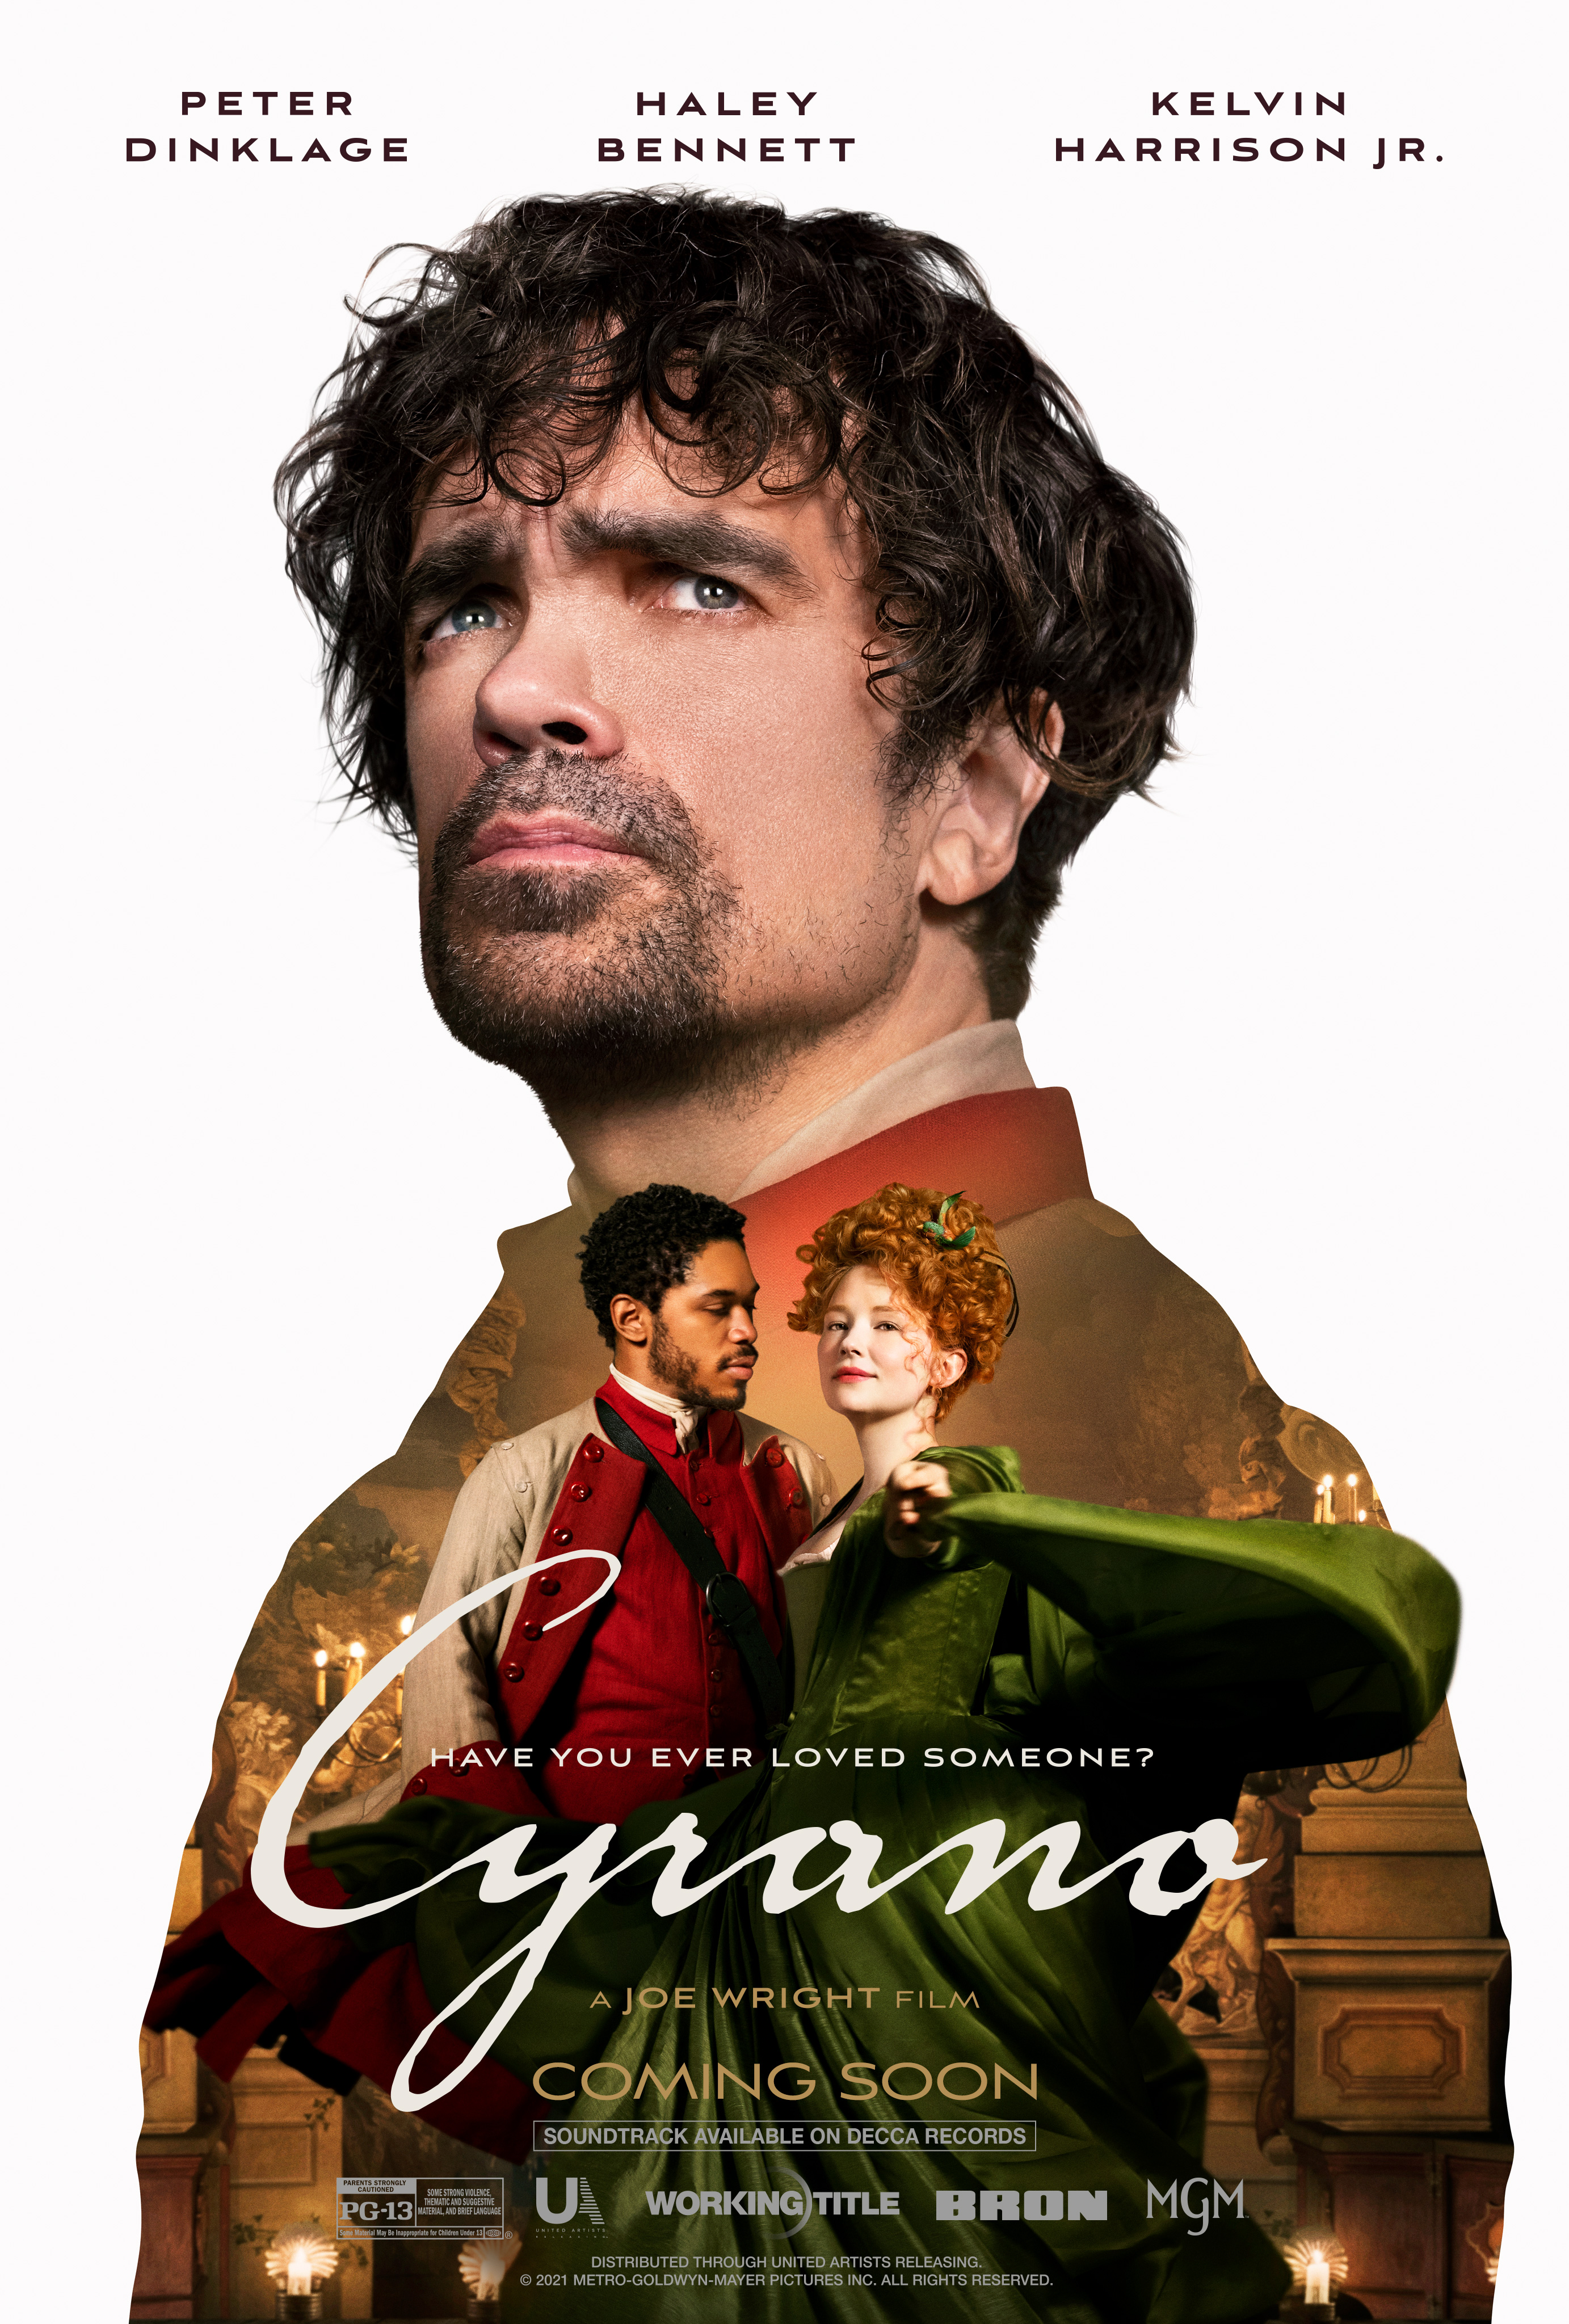 Ctrano movie poster. Man looking into distance as a woman and another man dance. 